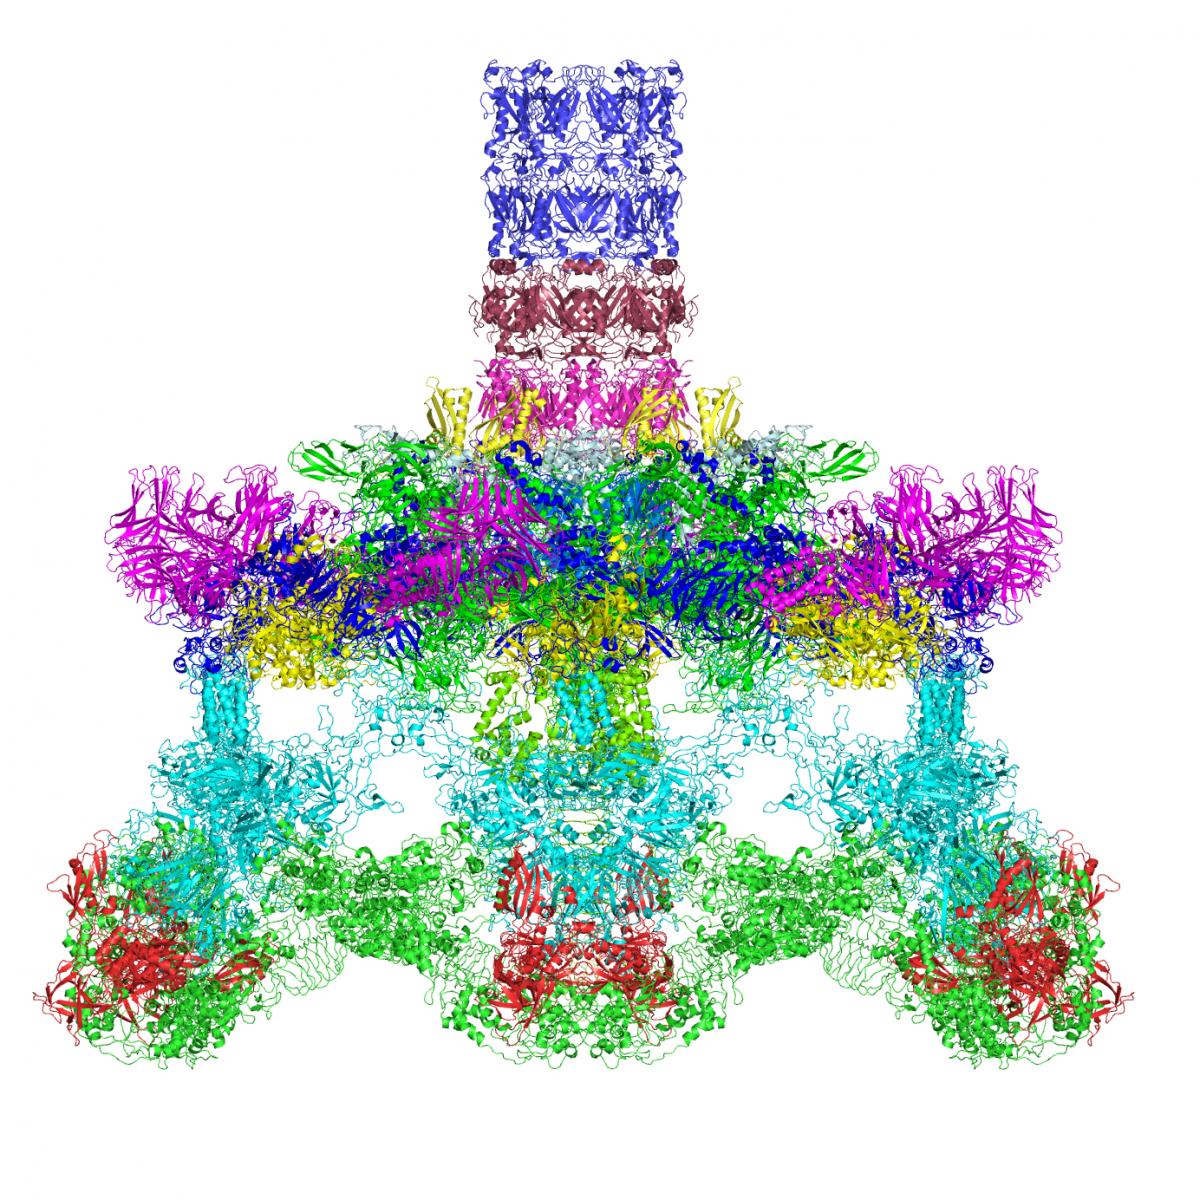 Molecular structure of a T4 bacteriophage baseplate